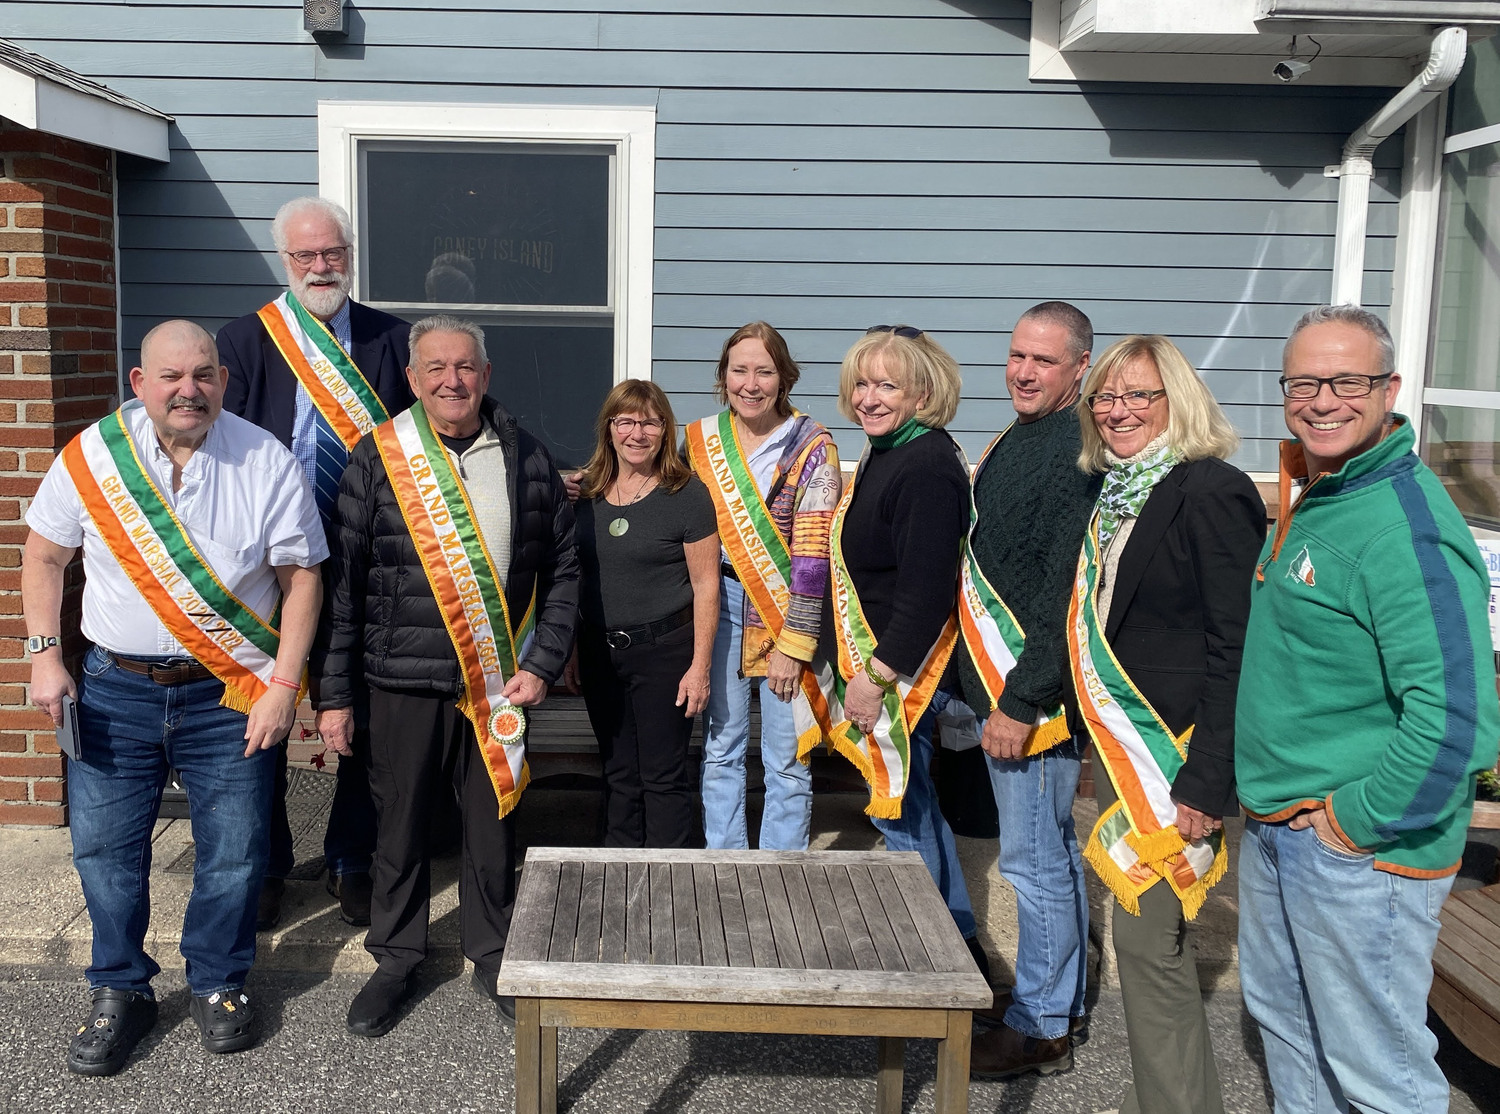 The Westhampton Beach St. Patrick’s Day Parade Committee has announced Patti Ziparo-Dalton as its 56th grand marshal for the 2024 parade. Standing with  Ziparo-Dalton (fourth from left) are past Grand Marshals, from left, Preston Jankowski (2022), Jim Hulme (2017) Bob Strebel (2007) Lynne Jones (2010), Sheryl Heather (2008), Digger Koziarz (2023), Donna Conti (2014) and Committee President Tim Laube. The 55th annual Westhampton Beach St. Patrick’s Day Parade is planned for Saturday, March 9, 2024. COURTESY TIM LAUBE